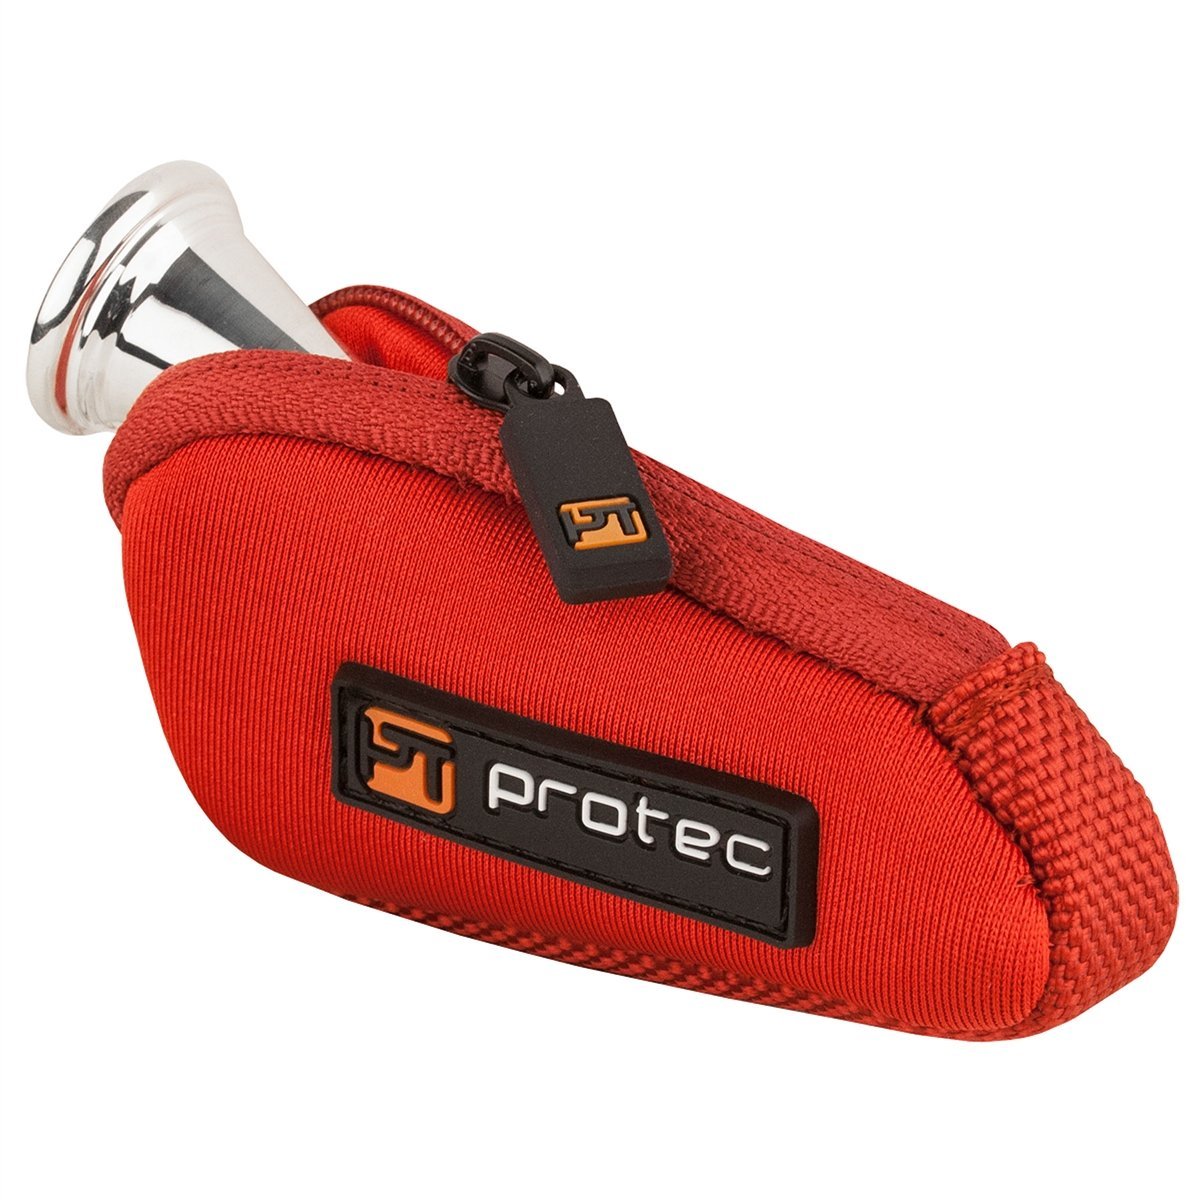 Protec - Single Neoprene Mouthpiece Pouch (for French Horn)-Accessories-Protec-Music Elements